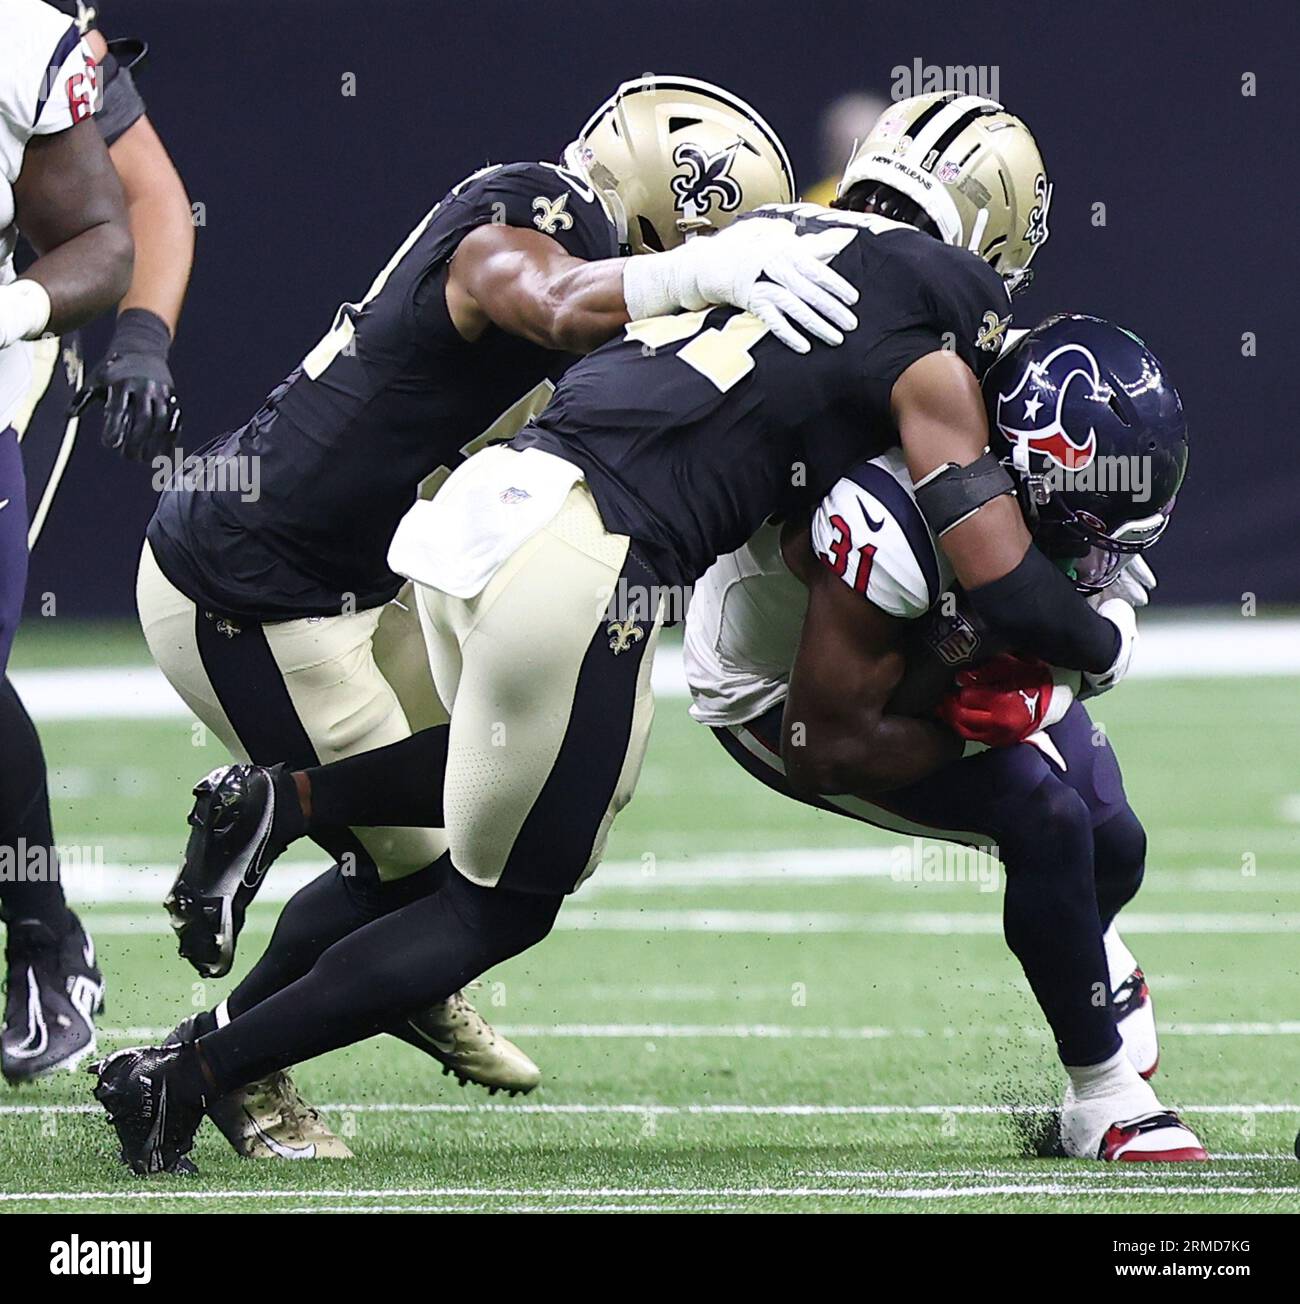 New Orleans, USA. 27th Aug, 2023. New Orleans Saints safety Jordan Howden  (31) tackles Houston Texans running back Dameon Pierce (31) during a  National Football League preseason game at the Caesars Superdome